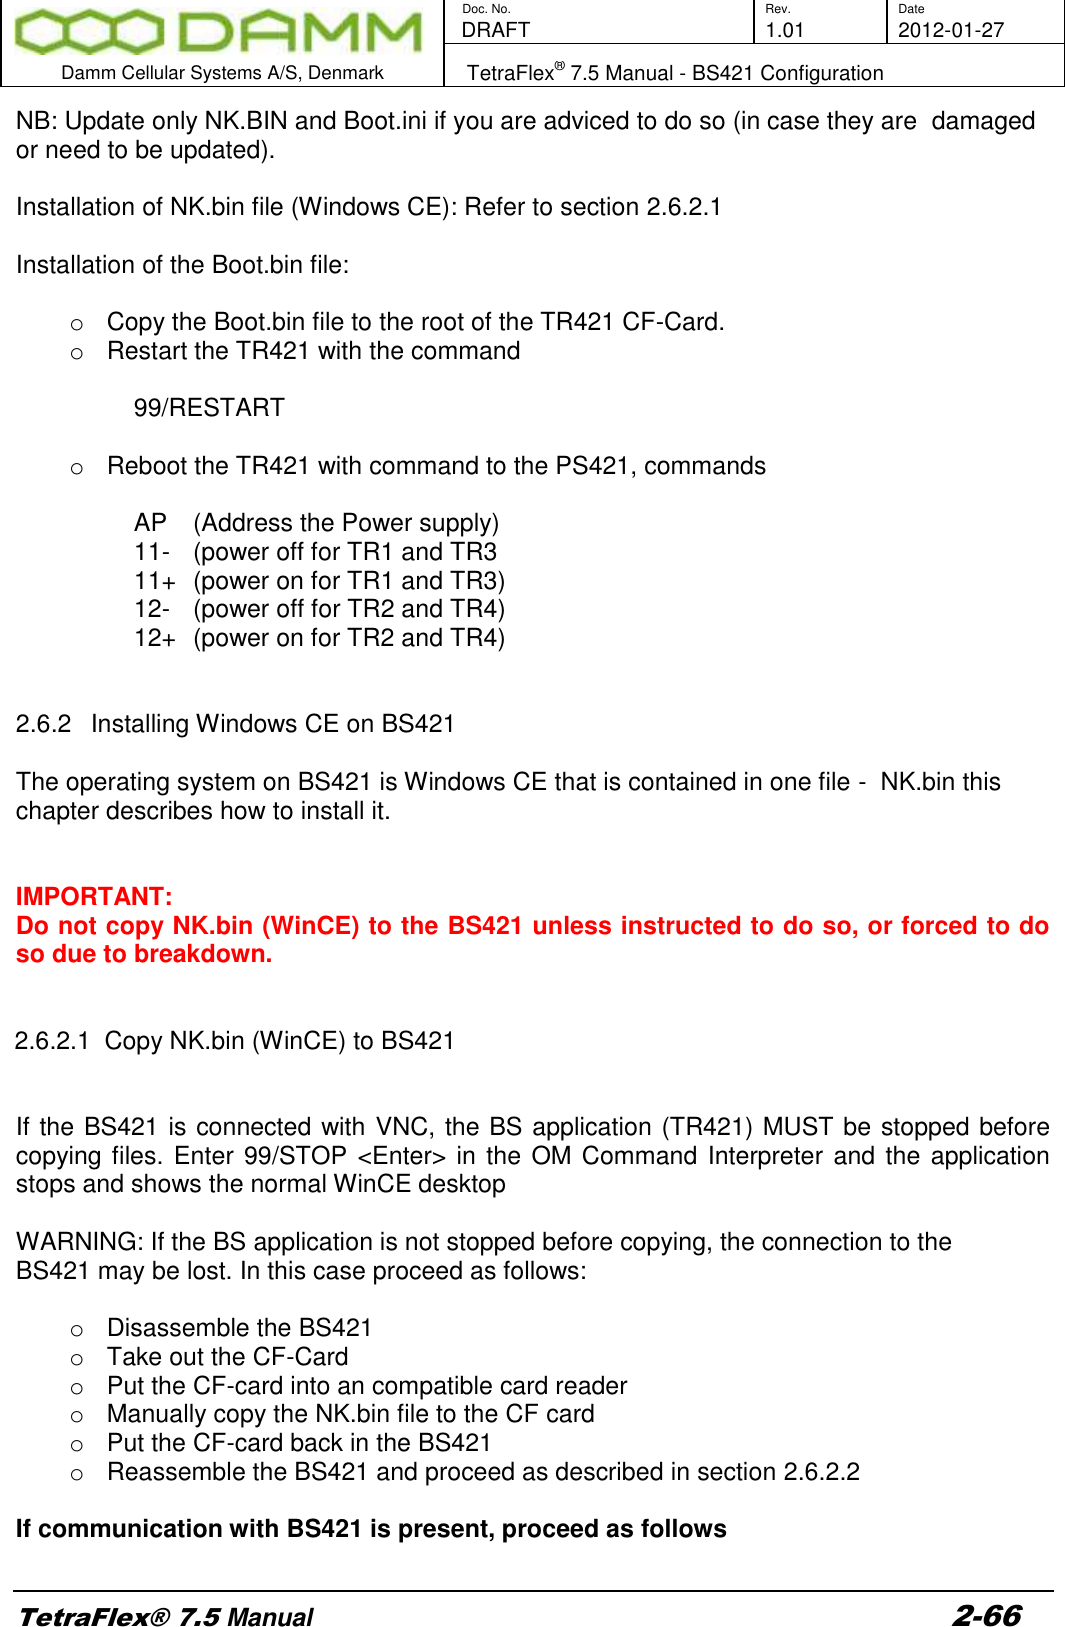        Doc. No. Rev. Date    DRAFT  1.01 2012-01-27  Damm Cellular Systems A/S, Denmark   TetraFlex® 7.5 Manual - BS421 Configuration  TetraFlex® 7.5 Manual 2-66 NB: Update only NK.BIN and Boot.ini if you are adviced to do so (in case they are  damaged or need to be updated).  Installation of NK.bin file (Windows CE): Refer to section 2.6.2.1  Installation of the Boot.bin file:  o  Copy the Boot.bin file to the root of the TR421 CF-Card. o  Restart the TR421 with the command    99/RESTART  o  Reboot the TR421 with command to the PS421, commands  AP    (Address the Power supply) 11-   (power off for TR1 and TR3 11+  (power on for TR1 and TR3) 12-   (power off for TR2 and TR4) 12+  (power on for TR2 and TR4)   2.6.2  Installing Windows CE on BS421   The operating system on BS421 is Windows CE that is contained in one file -  NK.bin this chapter describes how to install it.   IMPORTANT: Do not copy NK.bin (WinCE) to the BS421 unless instructed to do so, or forced to do so due to breakdown.   2.6.2.1  Copy NK.bin (WinCE) to BS421   If the BS421 is connected with VNC, the BS application (TR421) MUST be stopped before copying files. Enter 99/STOP &lt;Enter&gt; in the OM Command Interpreter and the application stops and shows the normal WinCE desktop  WARNING: If the BS application is not stopped before copying, the connection to the BS421 may be lost. In this case proceed as follows:  o  Disassemble the BS421 o  Take out the CF-Card o  Put the CF-card into an compatible card reader o  Manually copy the NK.bin file to the CF card o  Put the CF-card back in the BS421 o  Reassemble the BS421 and proceed as described in section 2.6.2.2  If communication with BS421 is present, proceed as follows  